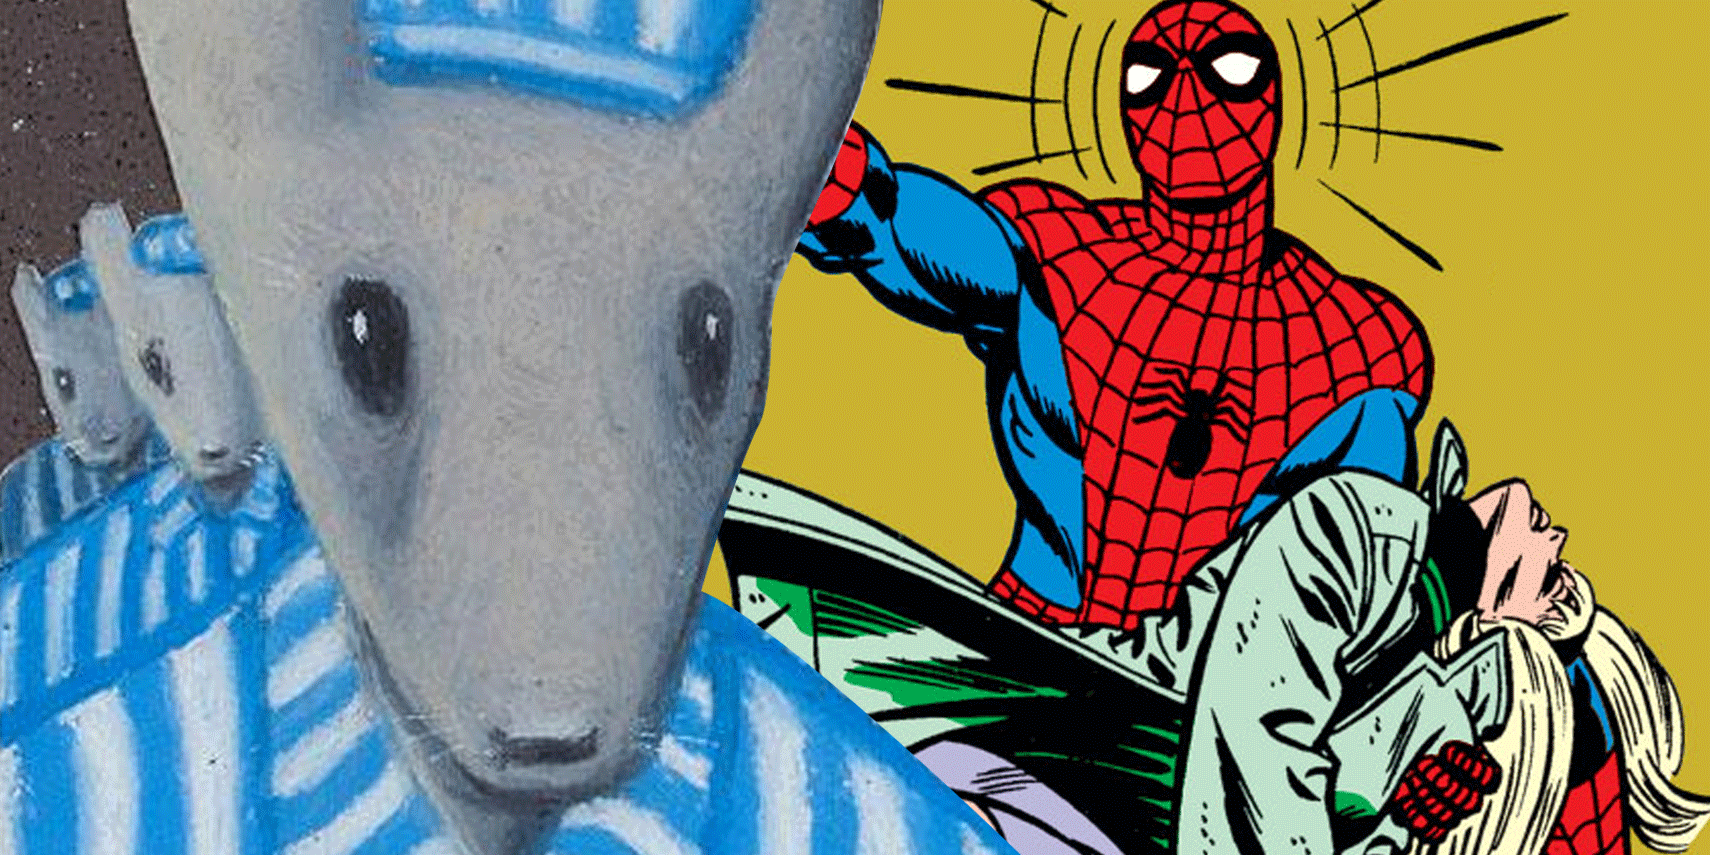 A split image of prisoners from Maus and Spider-Man with Gwen Stacy in Marvel Comics